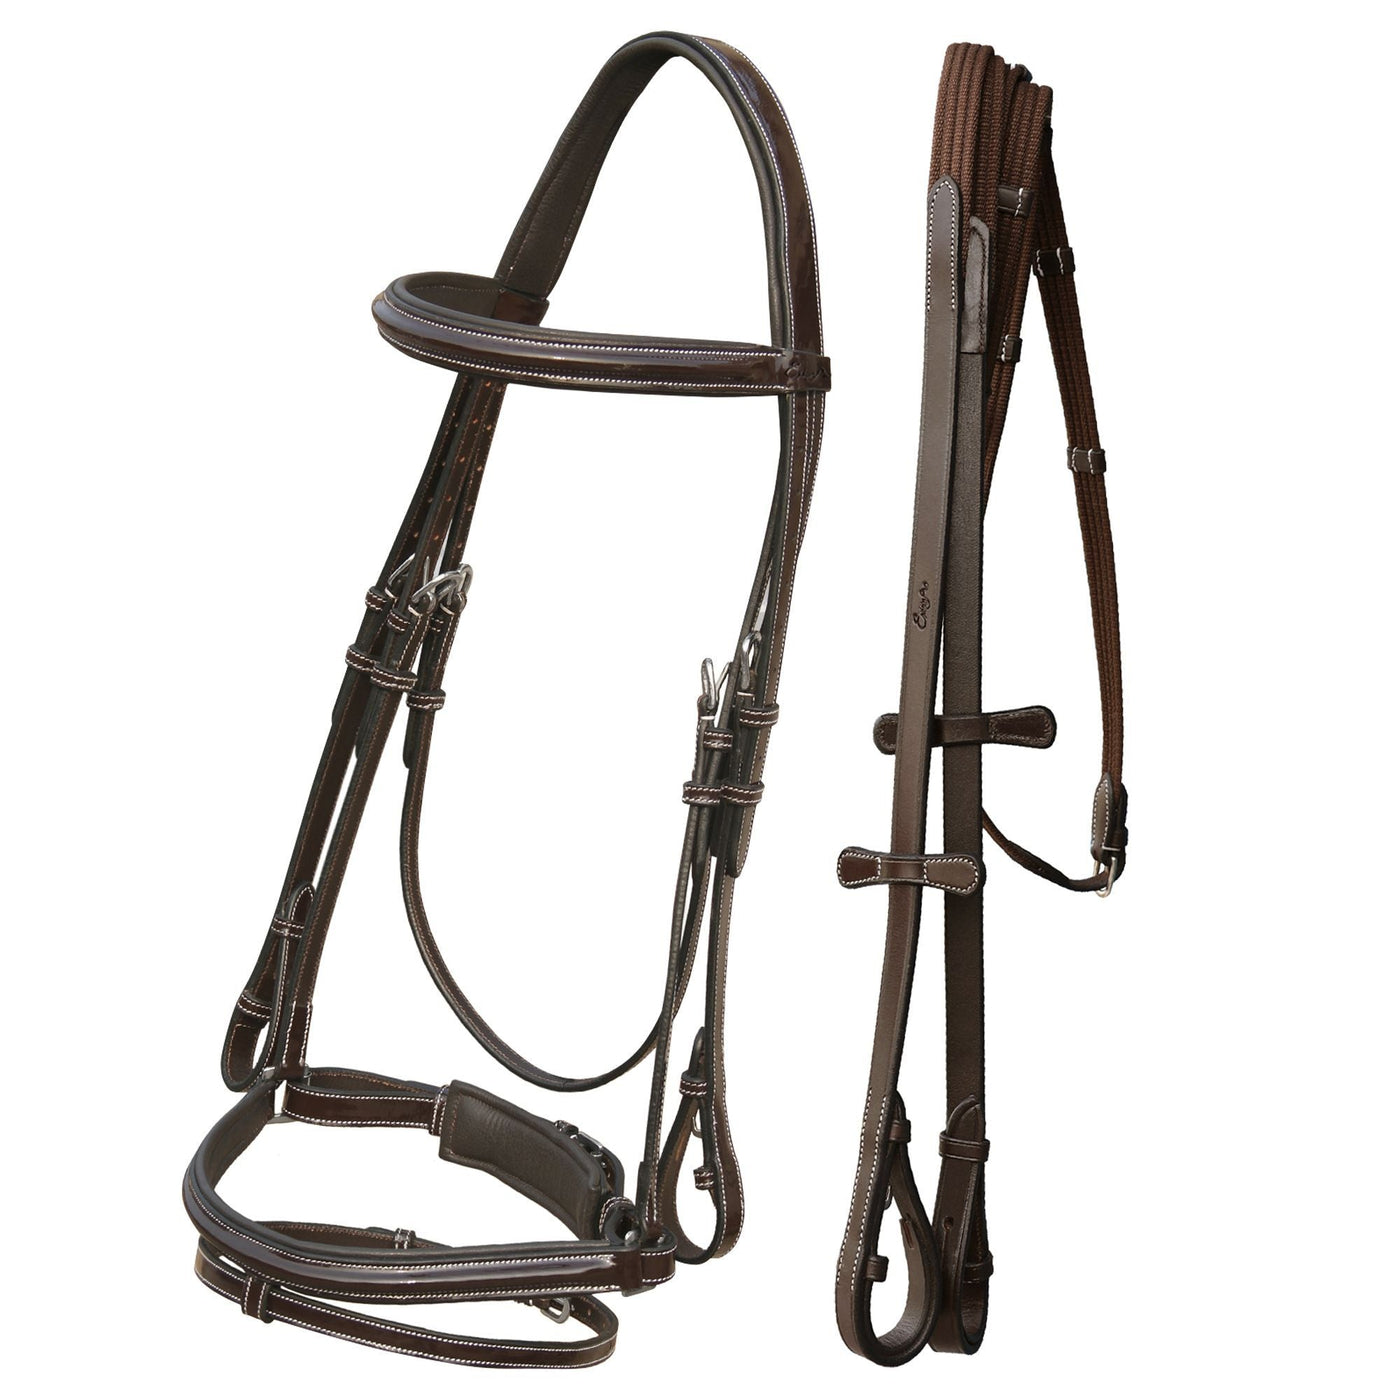 ExionPro Glossy Leather Dressage Bridle with Leather Reins